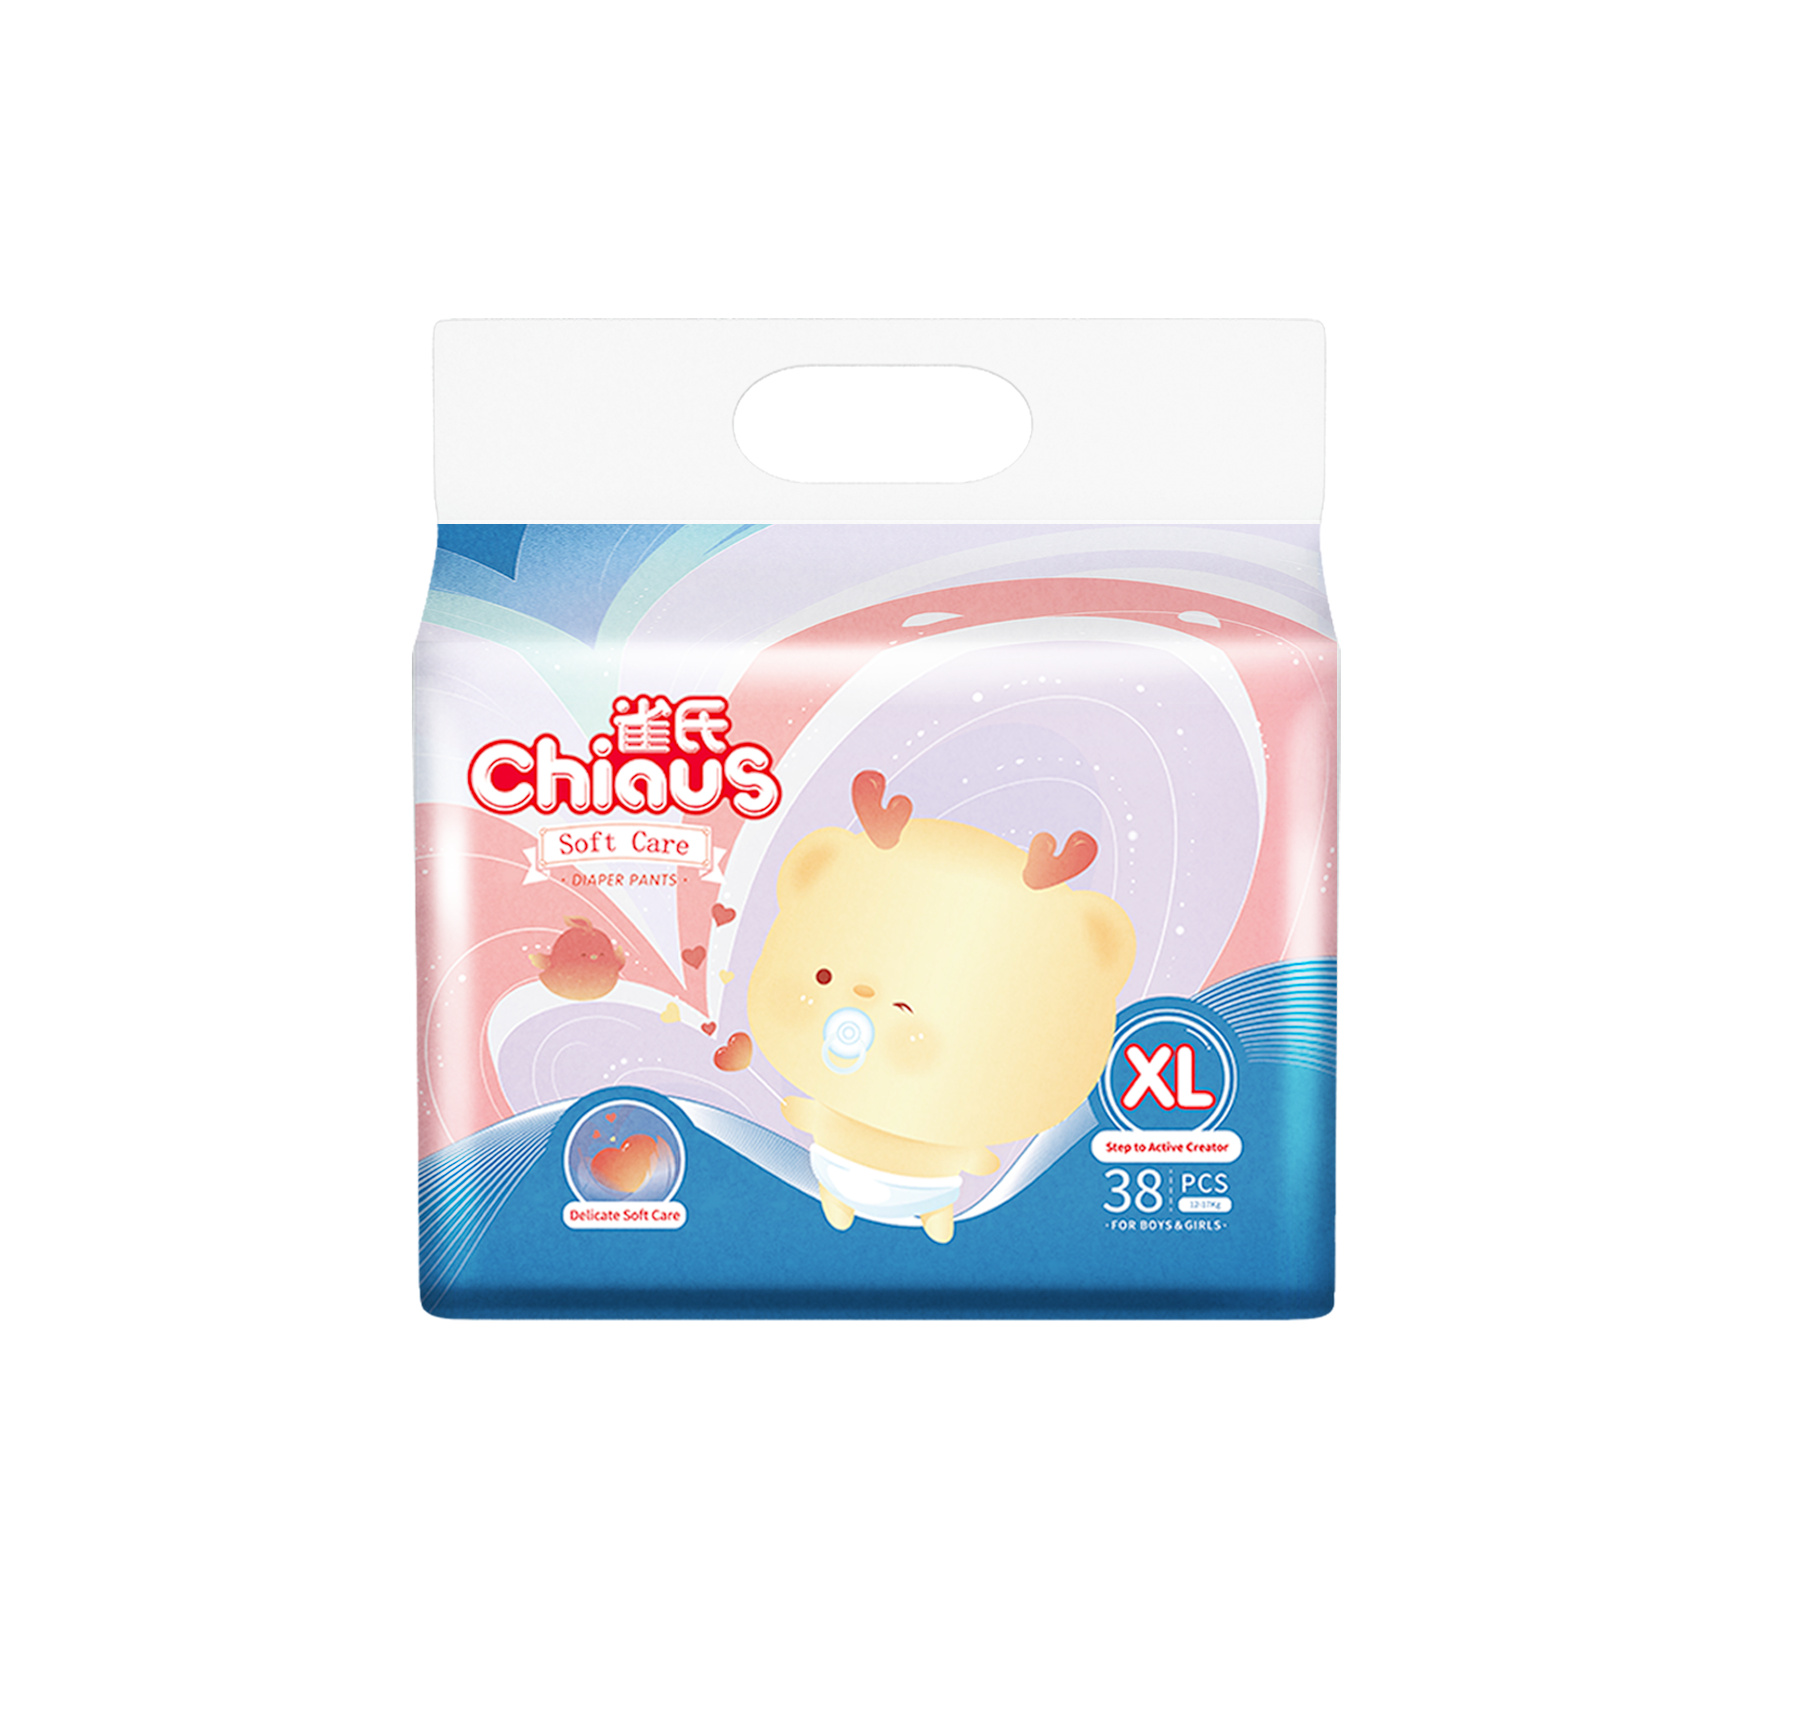 OEM Chiaus soft care diapers ultra soft ultra absorption from China factory  and suppliers